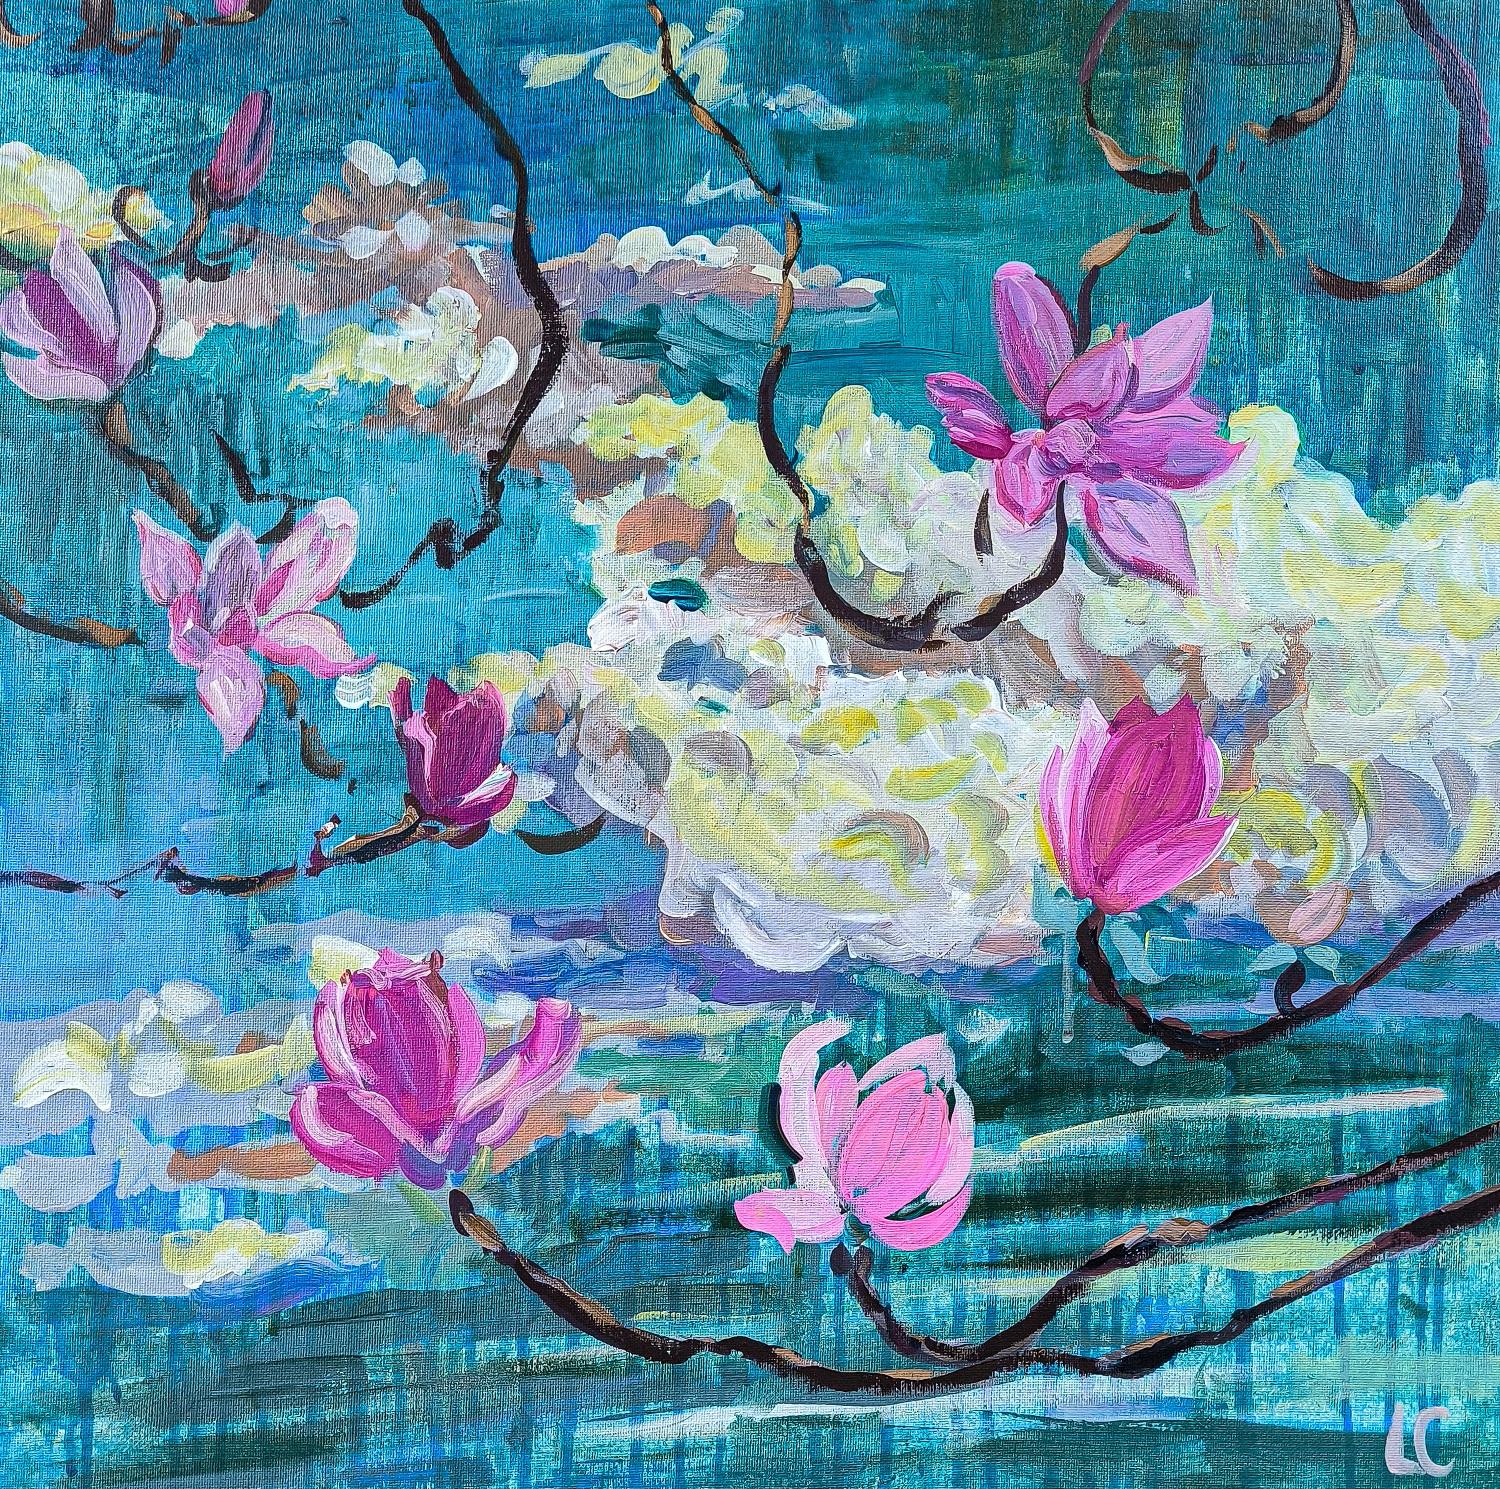 Magnolia Forever I & II & Iris bloom too - Fauvist Painting by  Linda Clerget